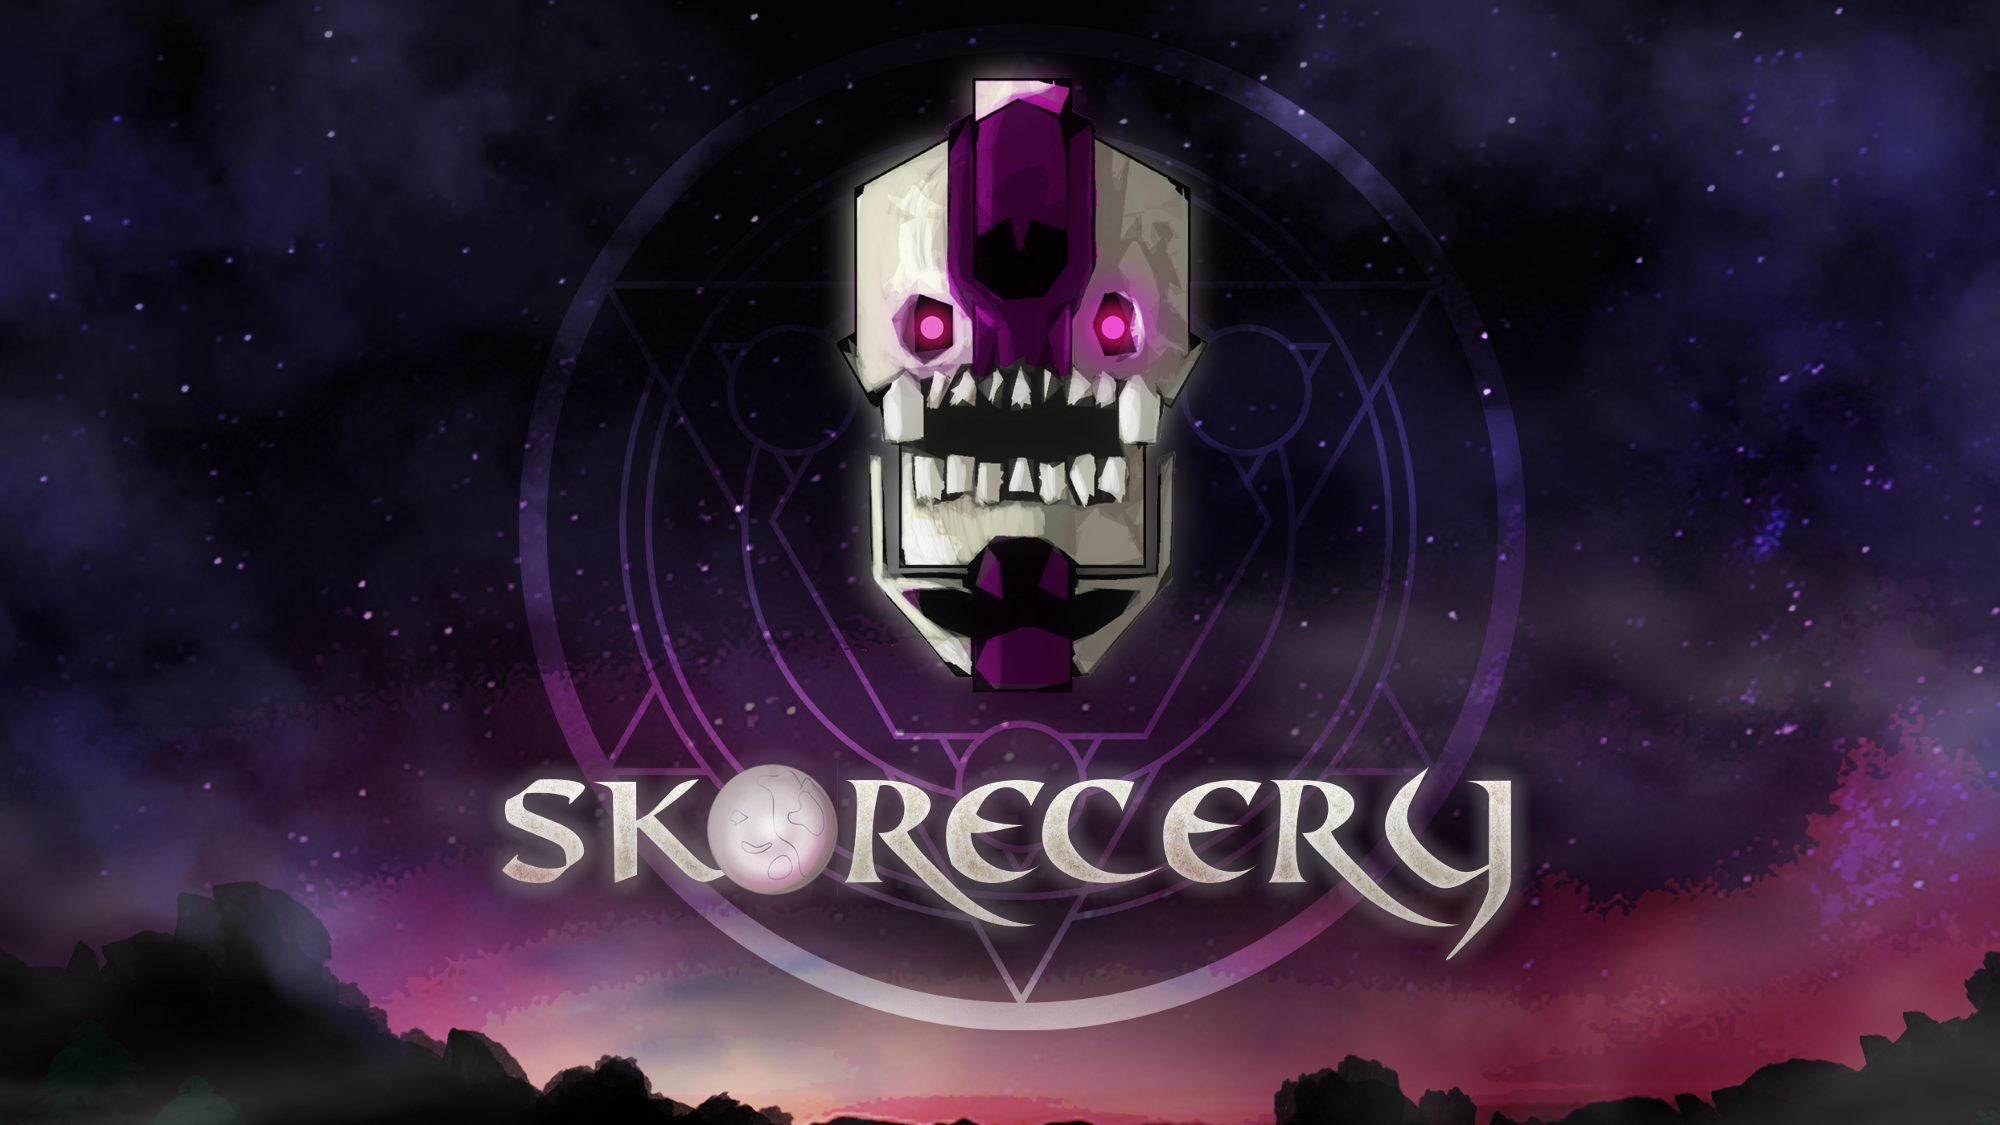 Skorecery for PlayStation 4 launches February 5